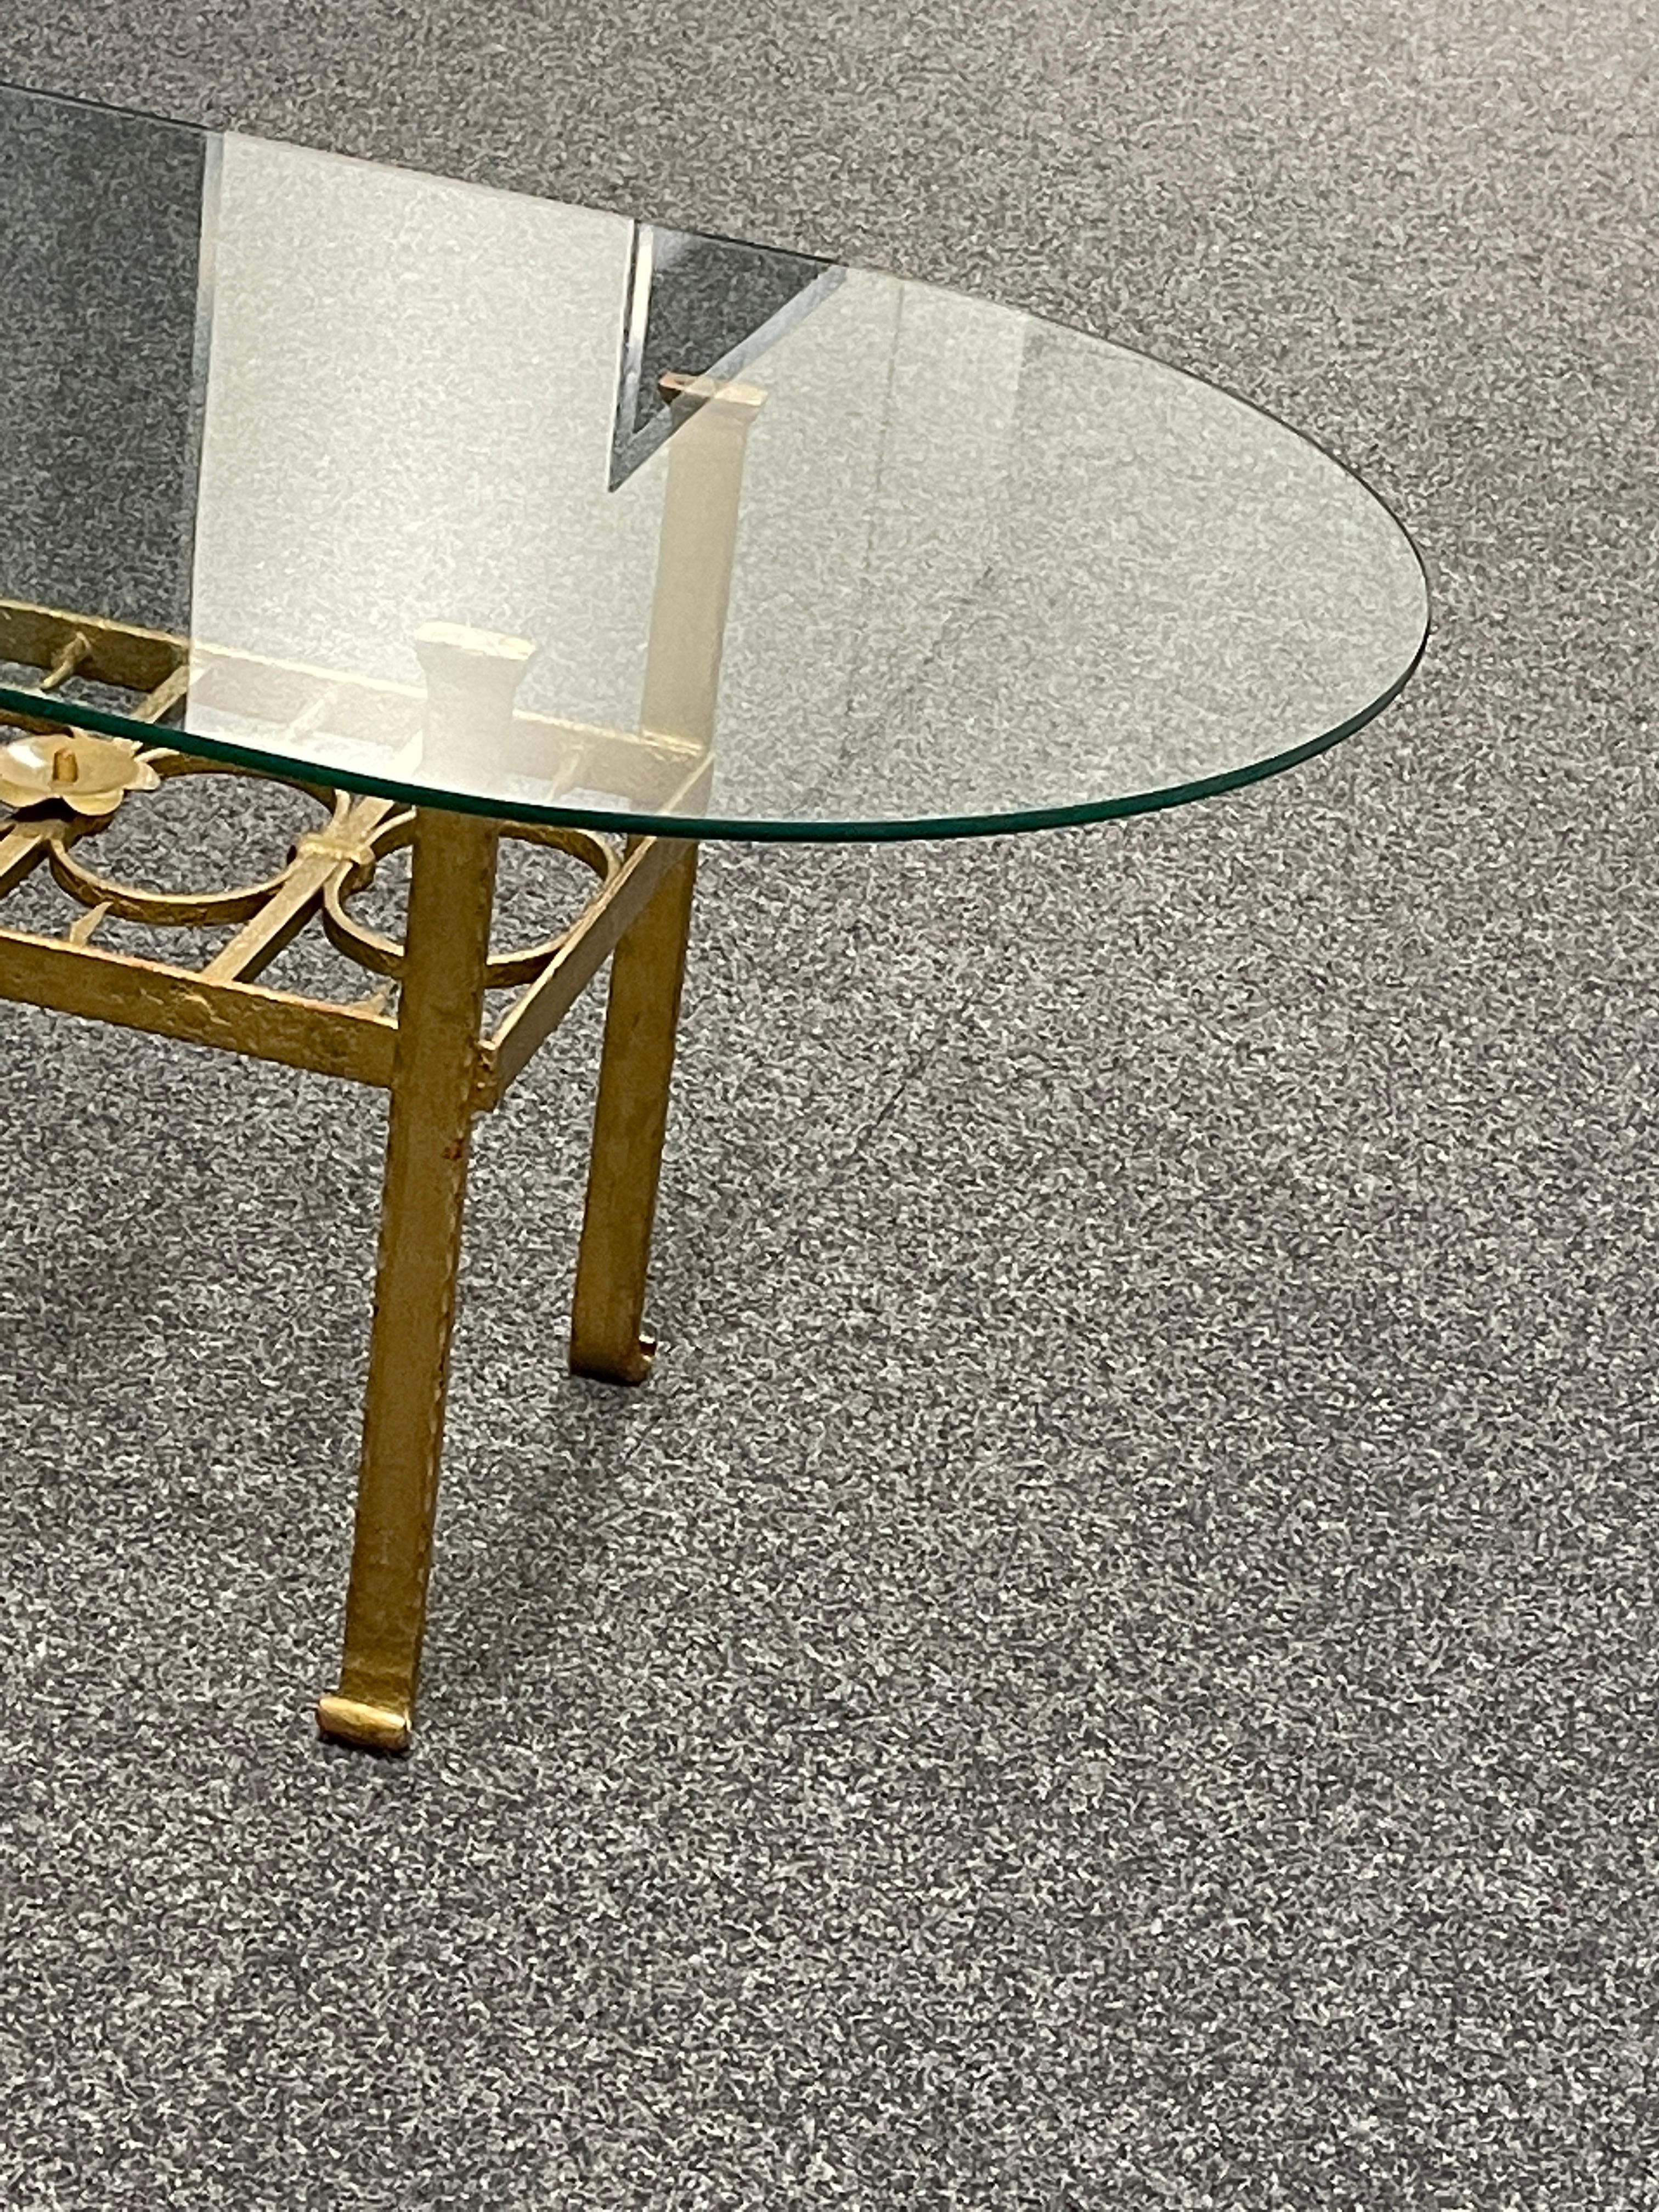 Brutalist Gilt Iron Coffee Table, Tole Toleware Style, German, 1960s For Sale 4